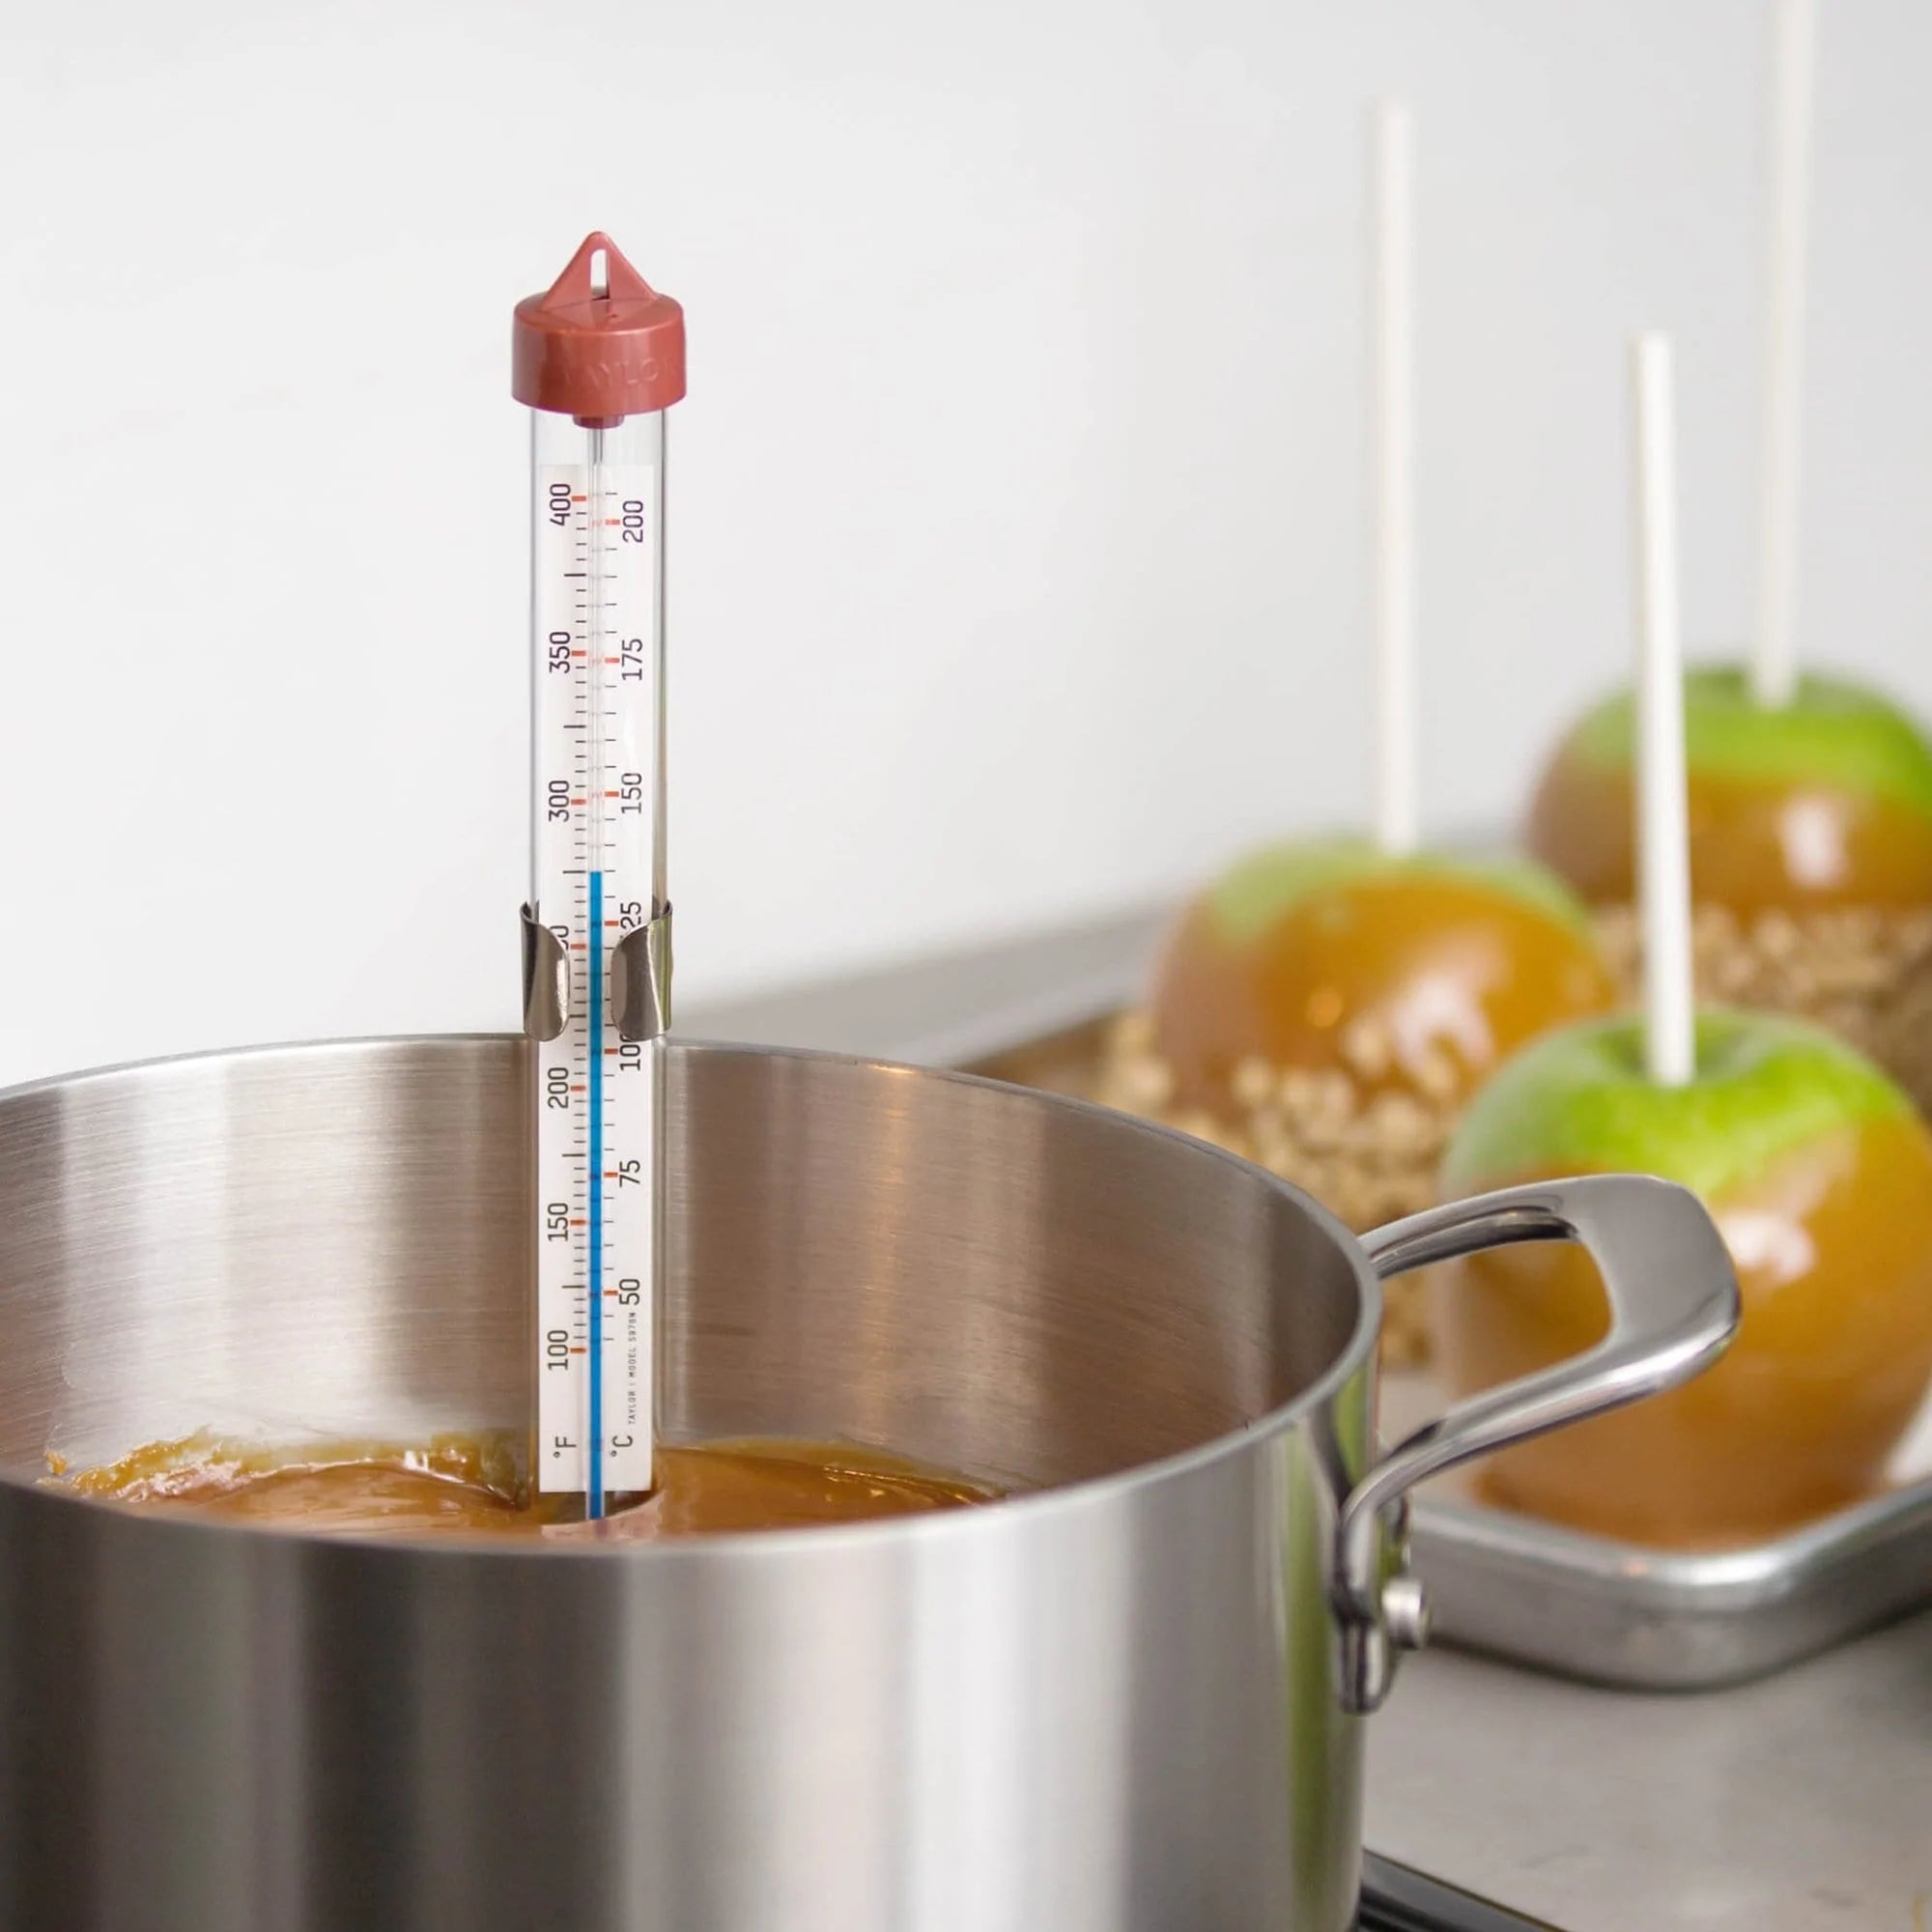 How to use a candy thermometer